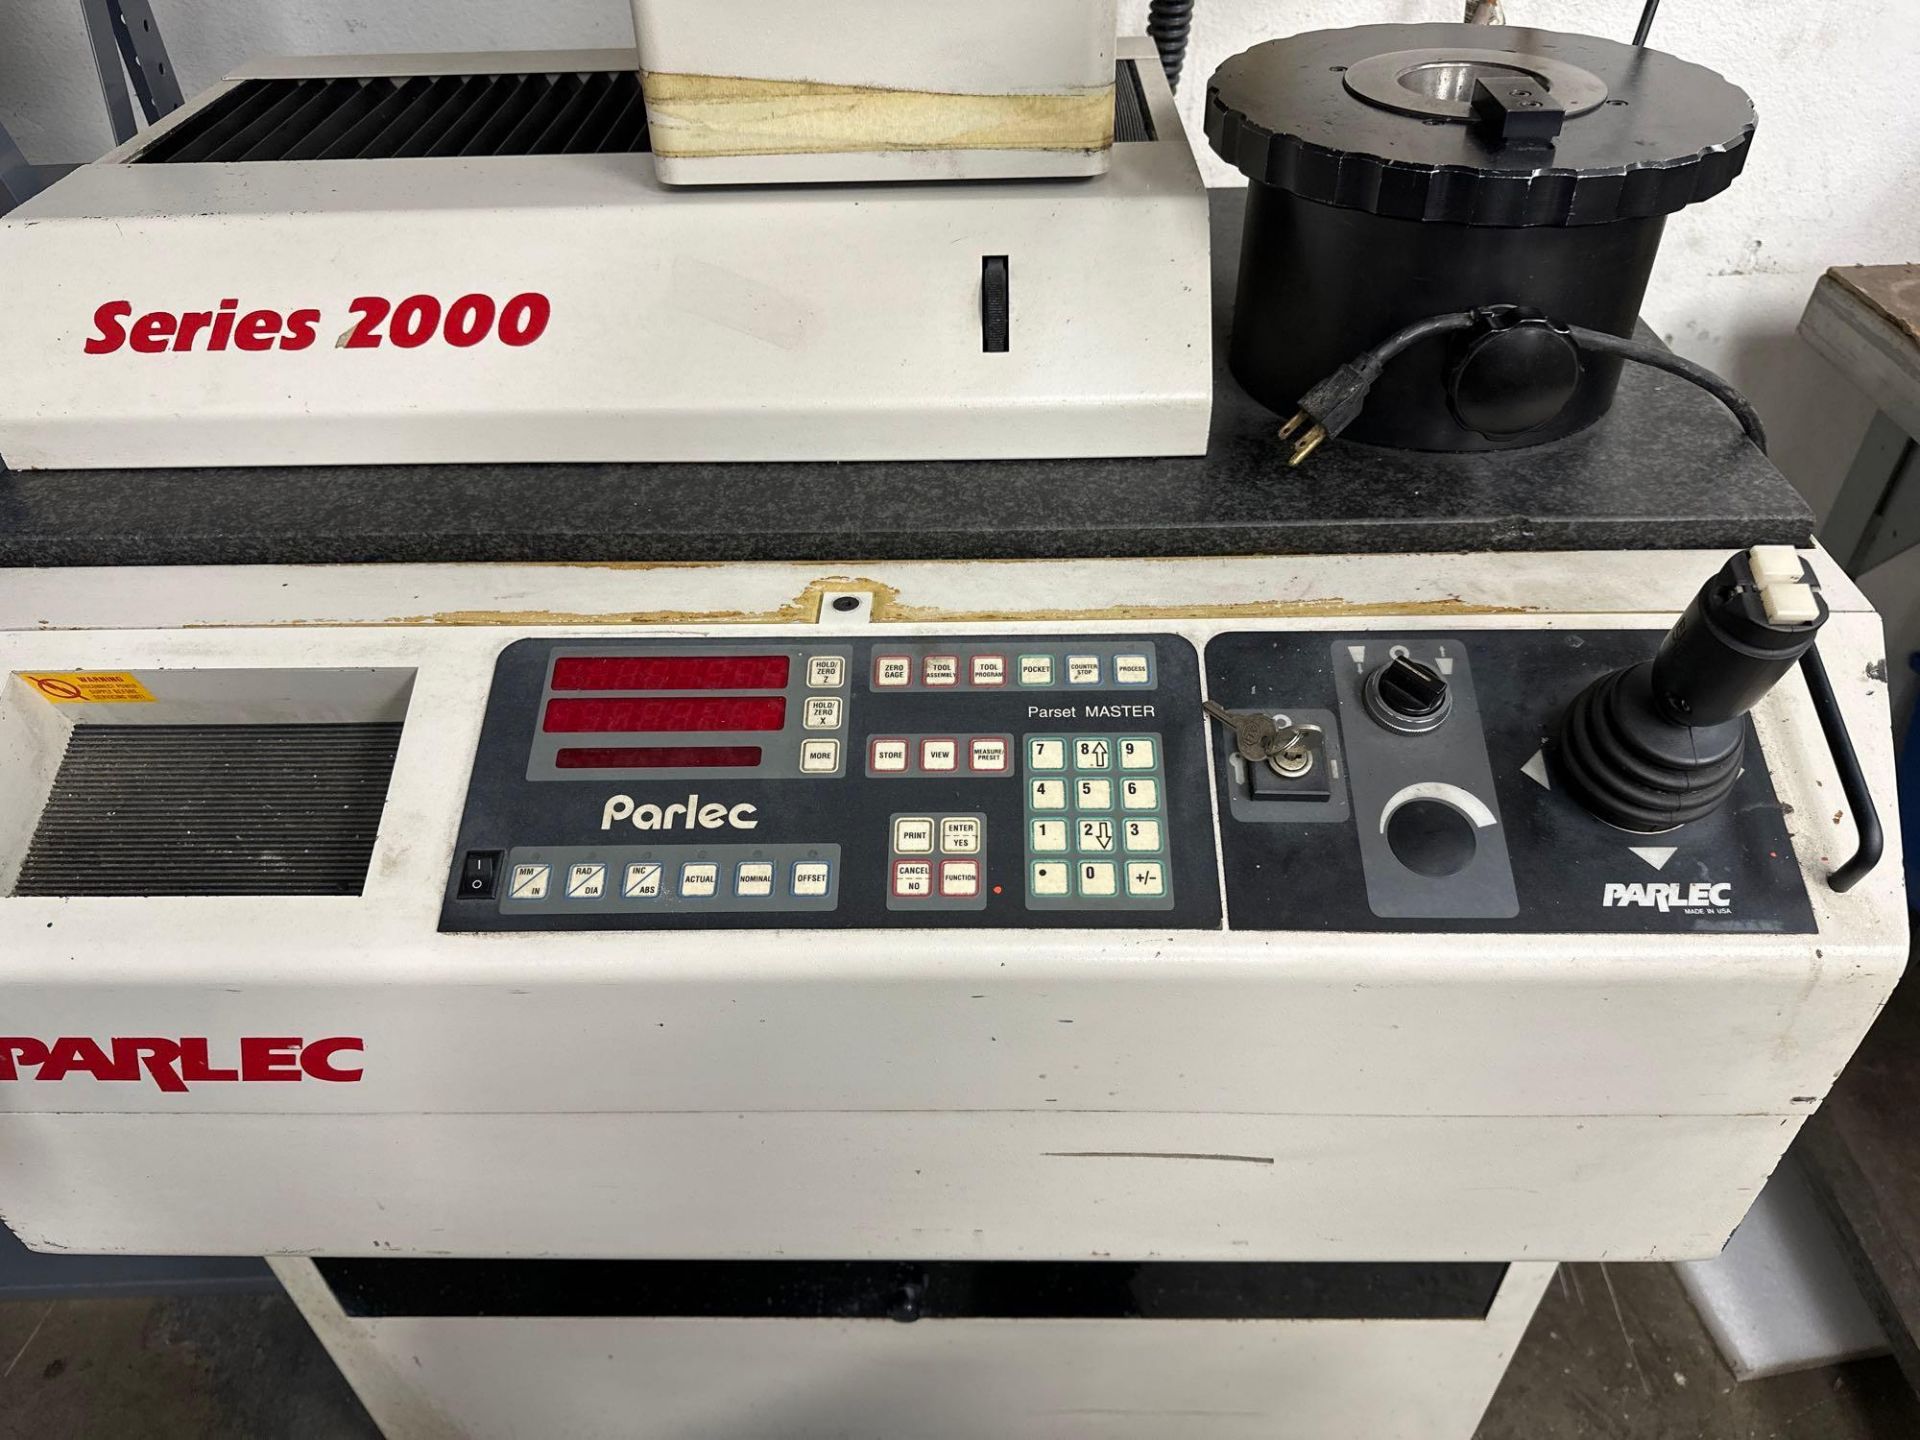 Parlec Series 2000 Parserrer TMM Tool Presetter *PARTS ONLY* - Image 4 of 5